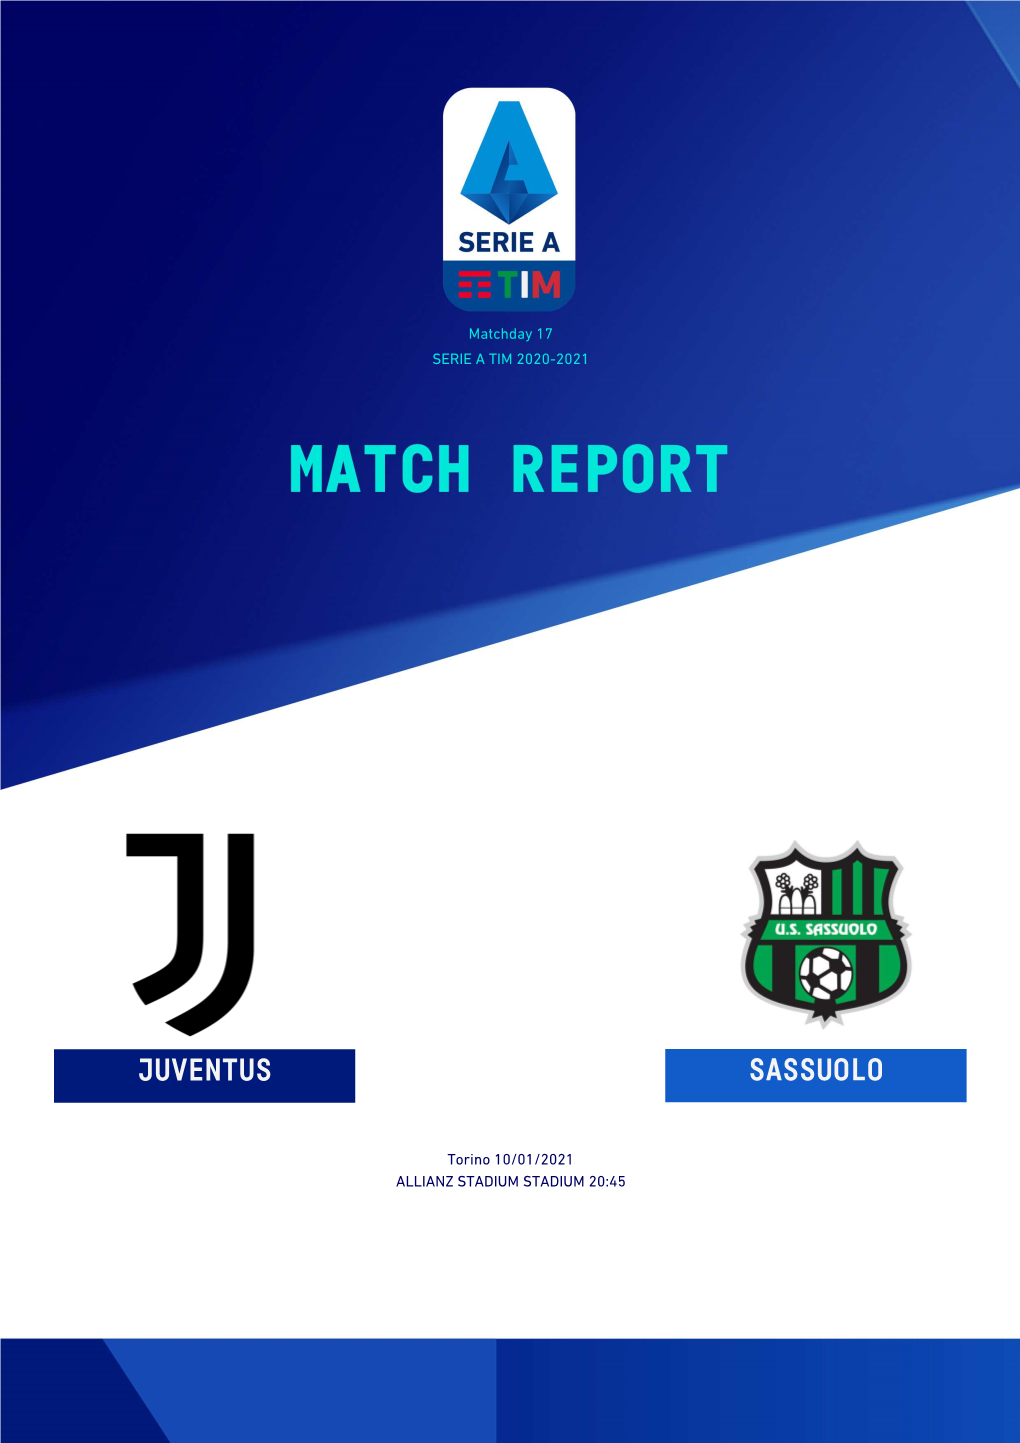 Download PDF with Full Match Report